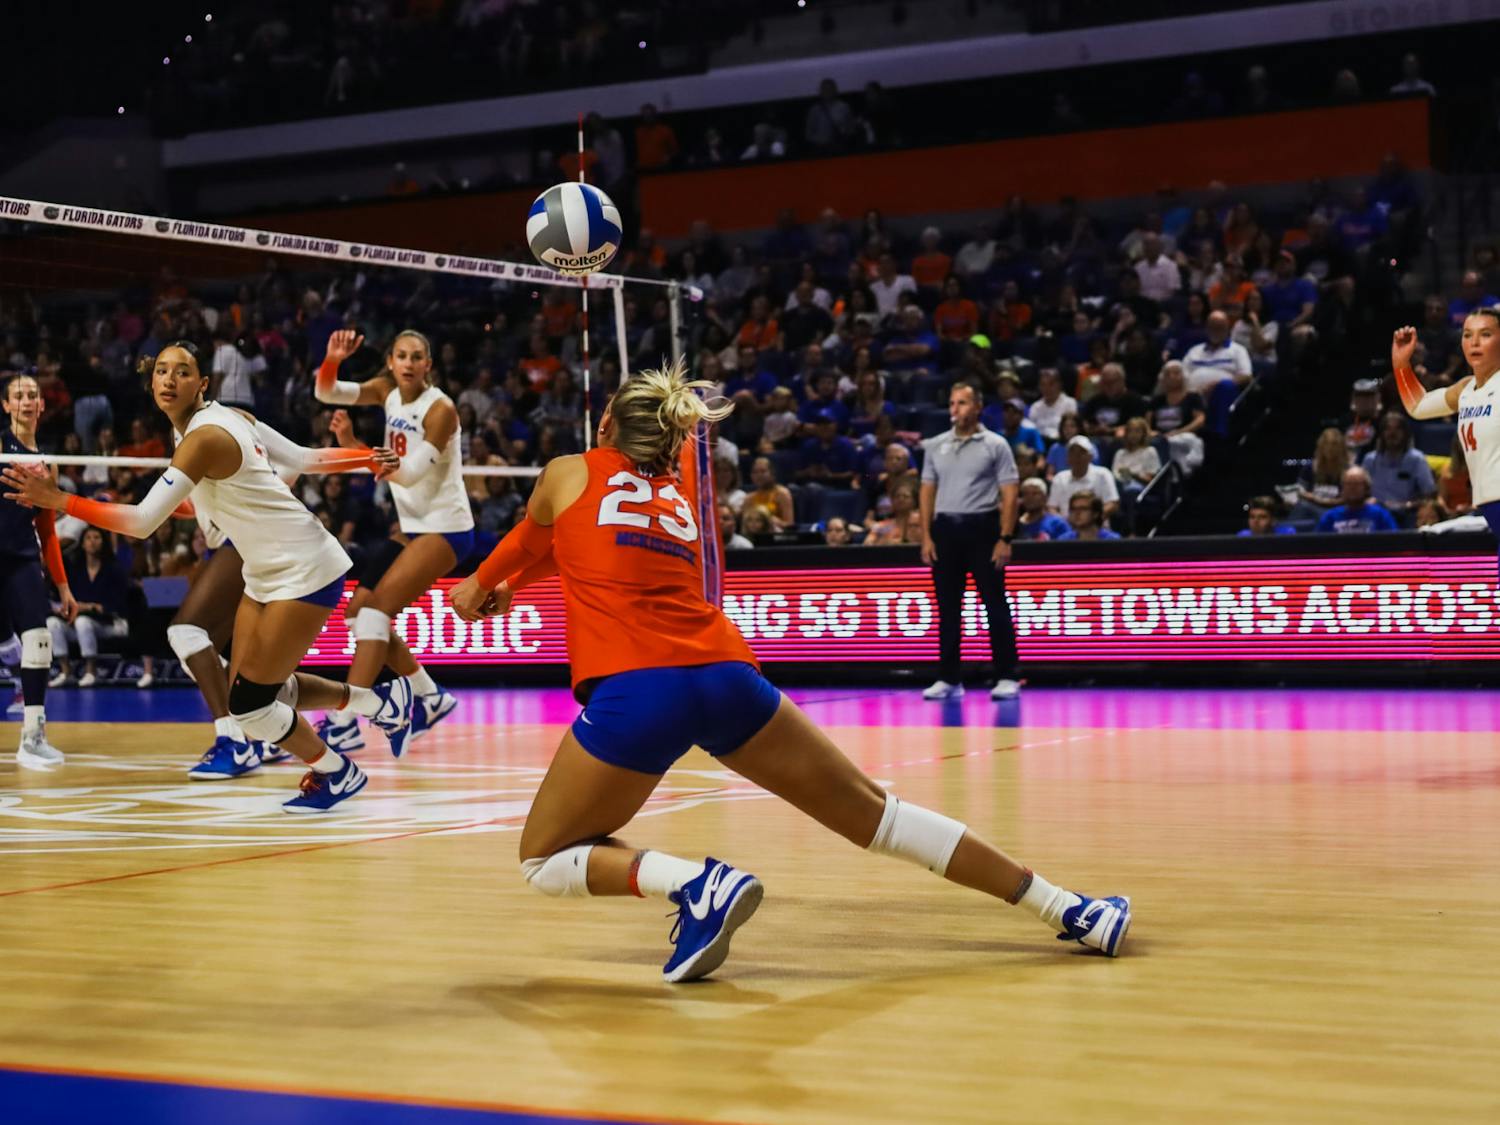 Senior libero Elli McKissock dives to set the ball in the Gators' 3-0 loss to the Auburn Tigers on Friday, Oct. 6, 2023.